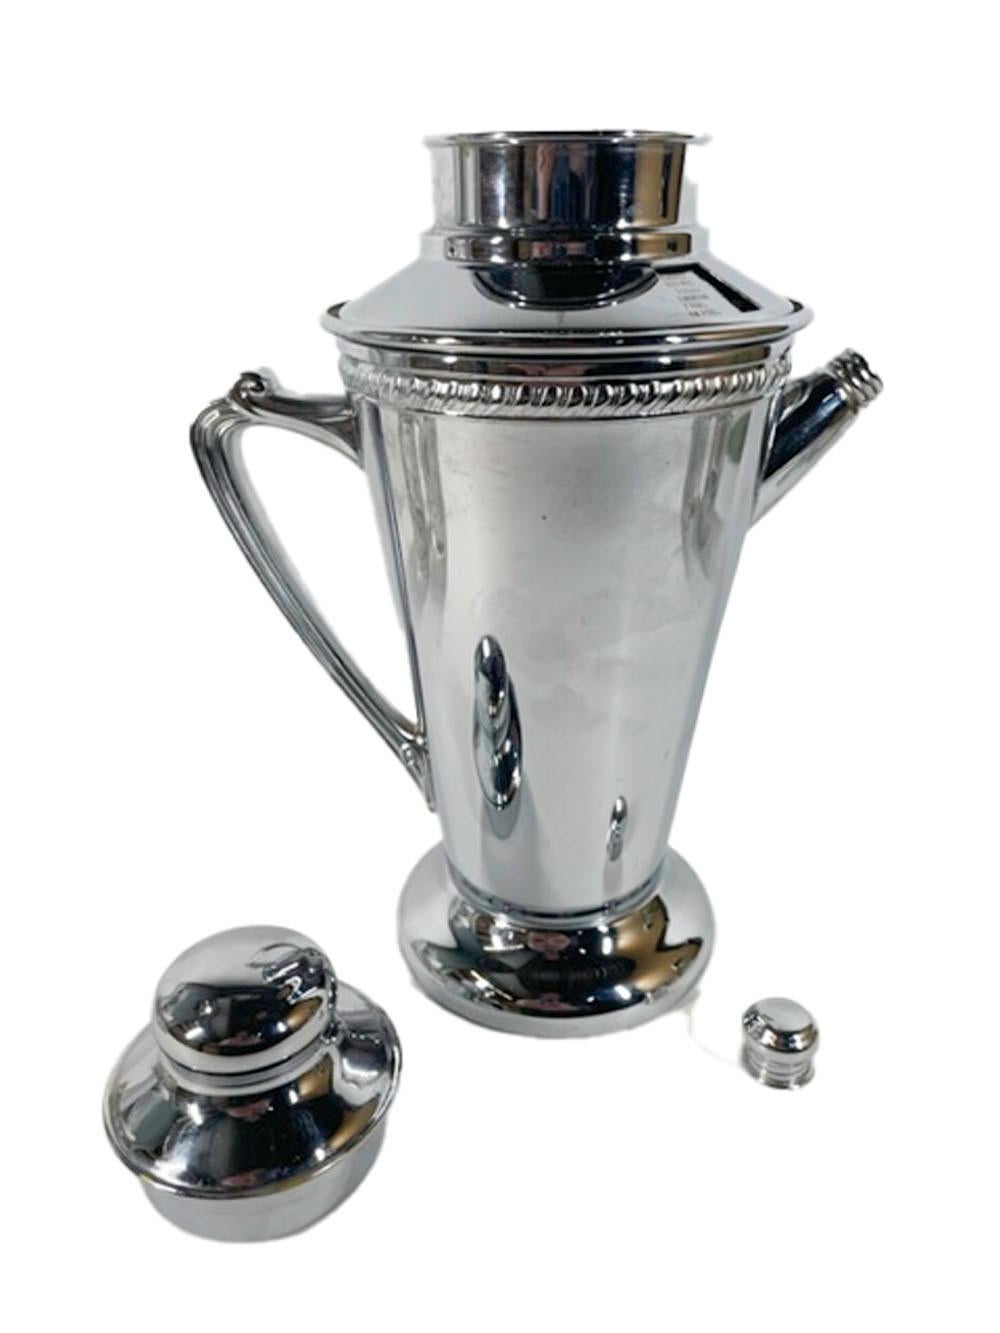 20th Century Art Deco Dial-A-Drink, 14 Recipe, Chrome Cocktail Shaker